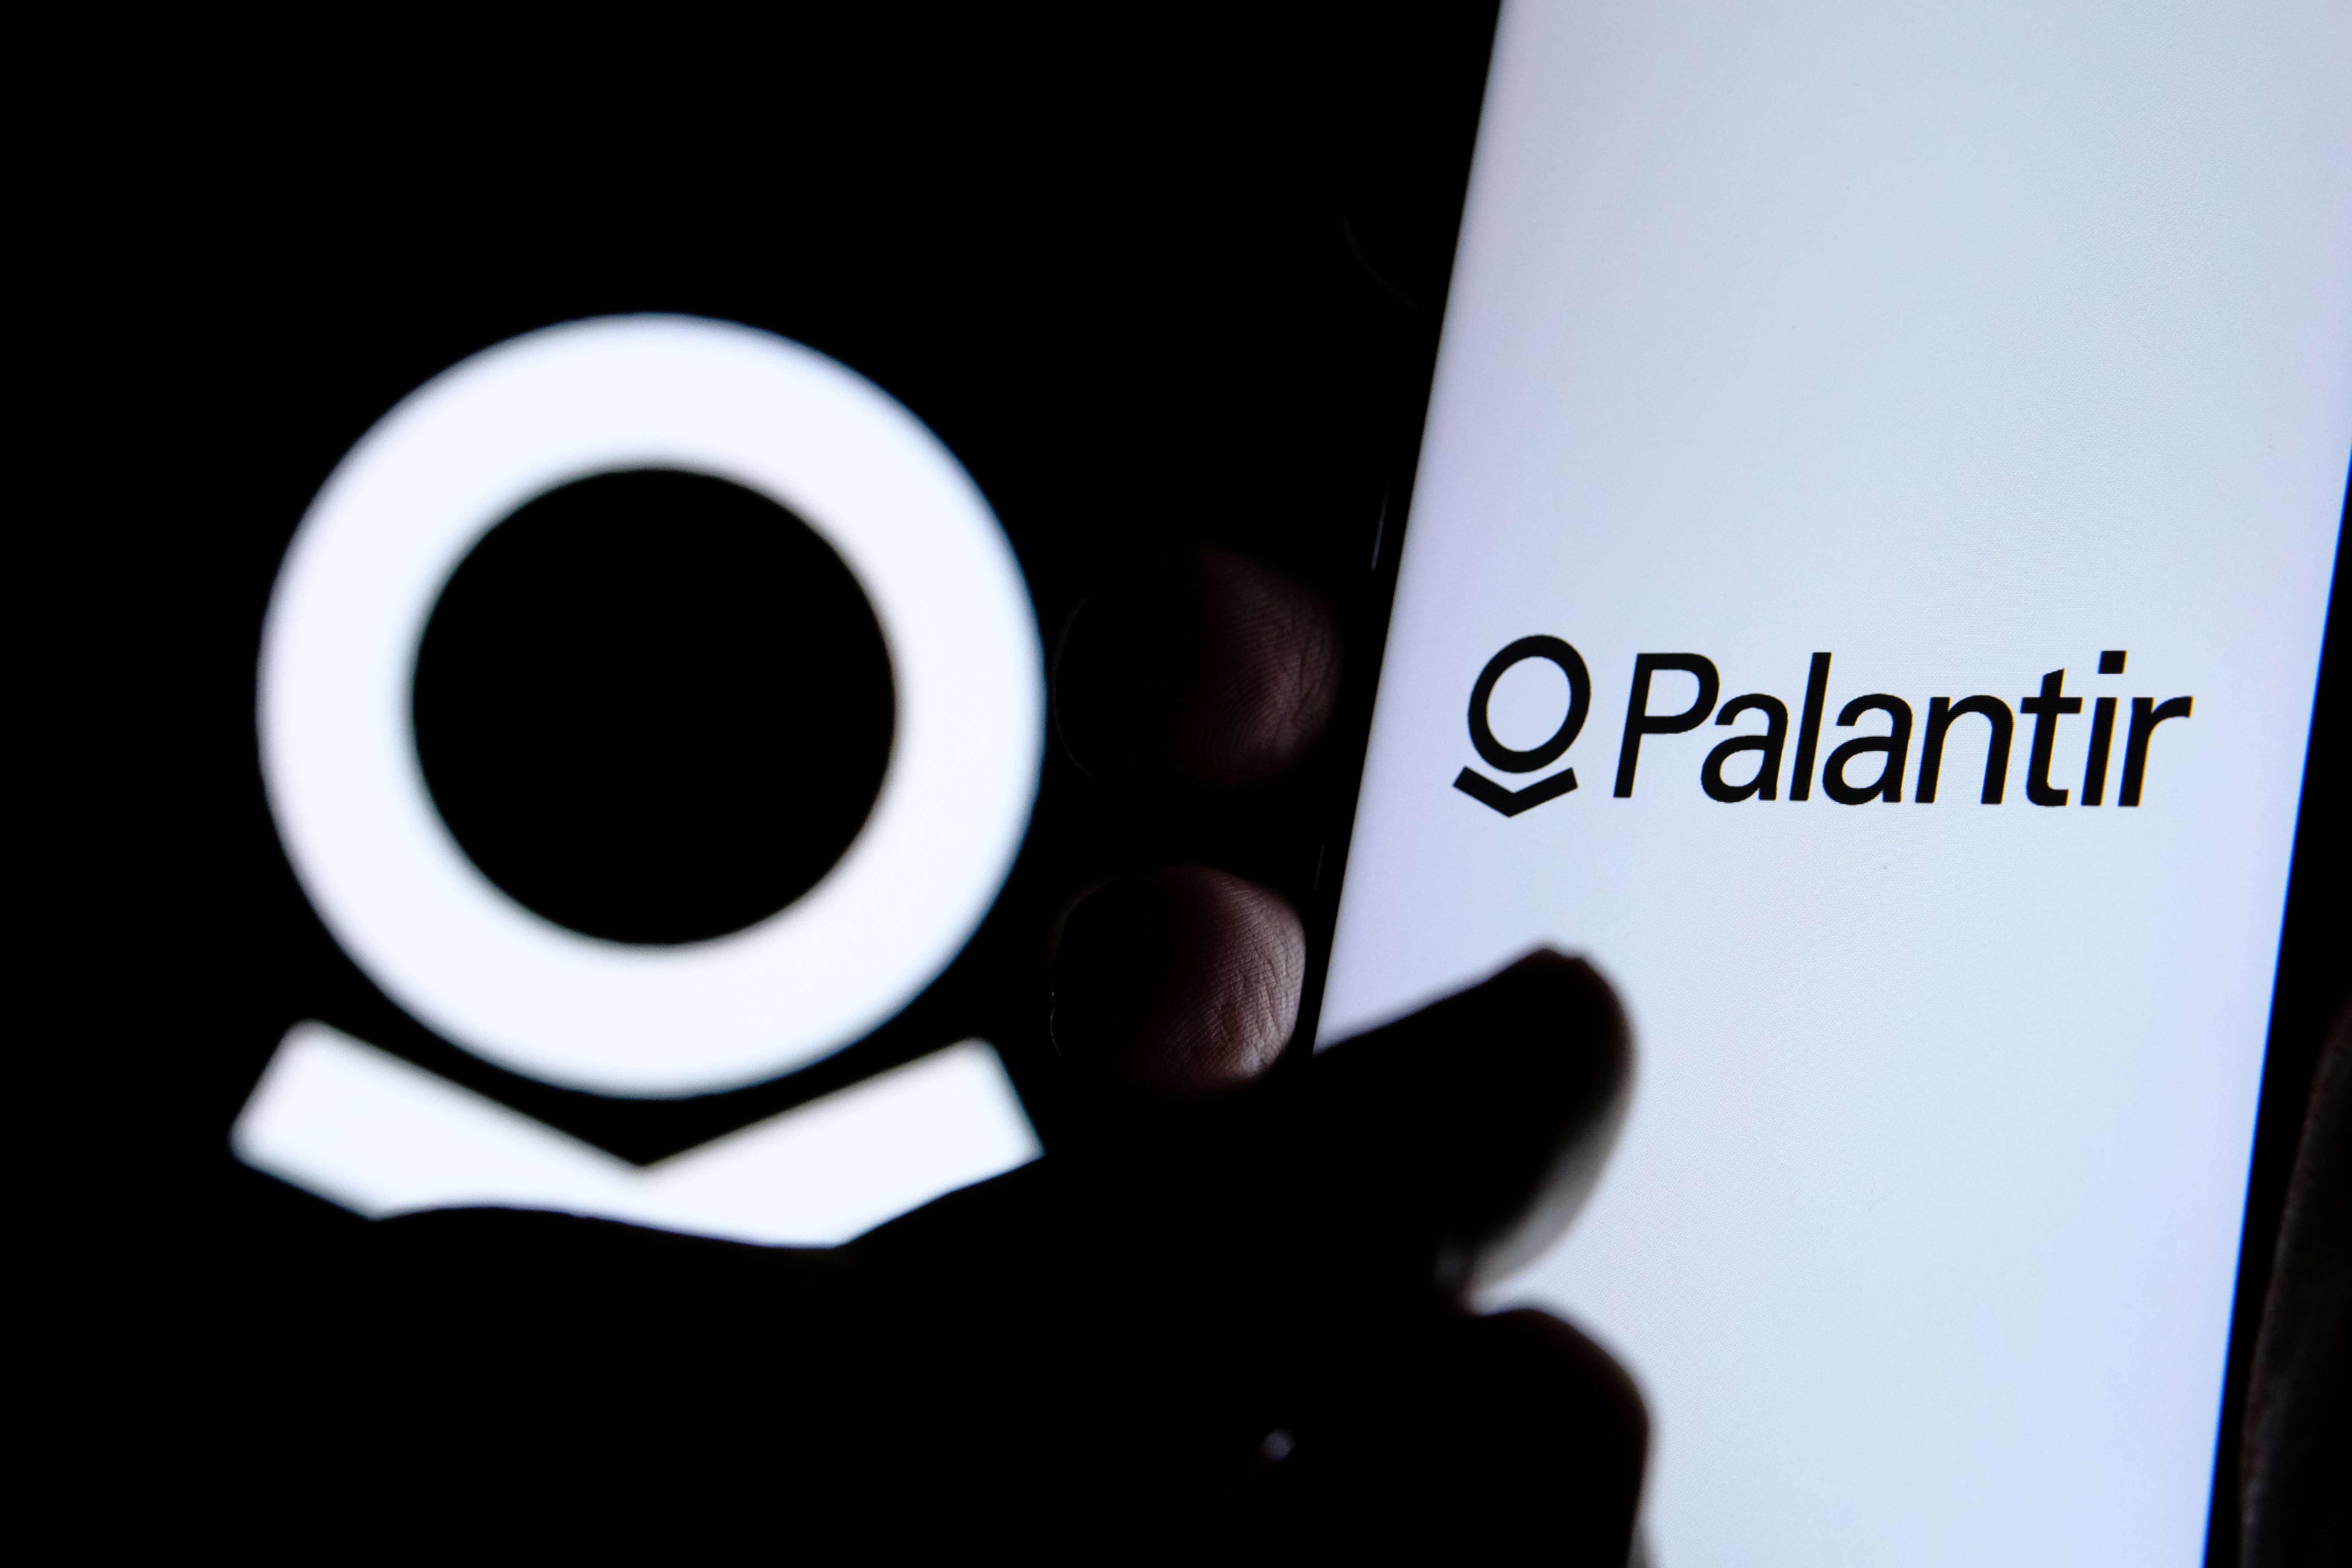 Will The Real Palantir Please Stand Up?